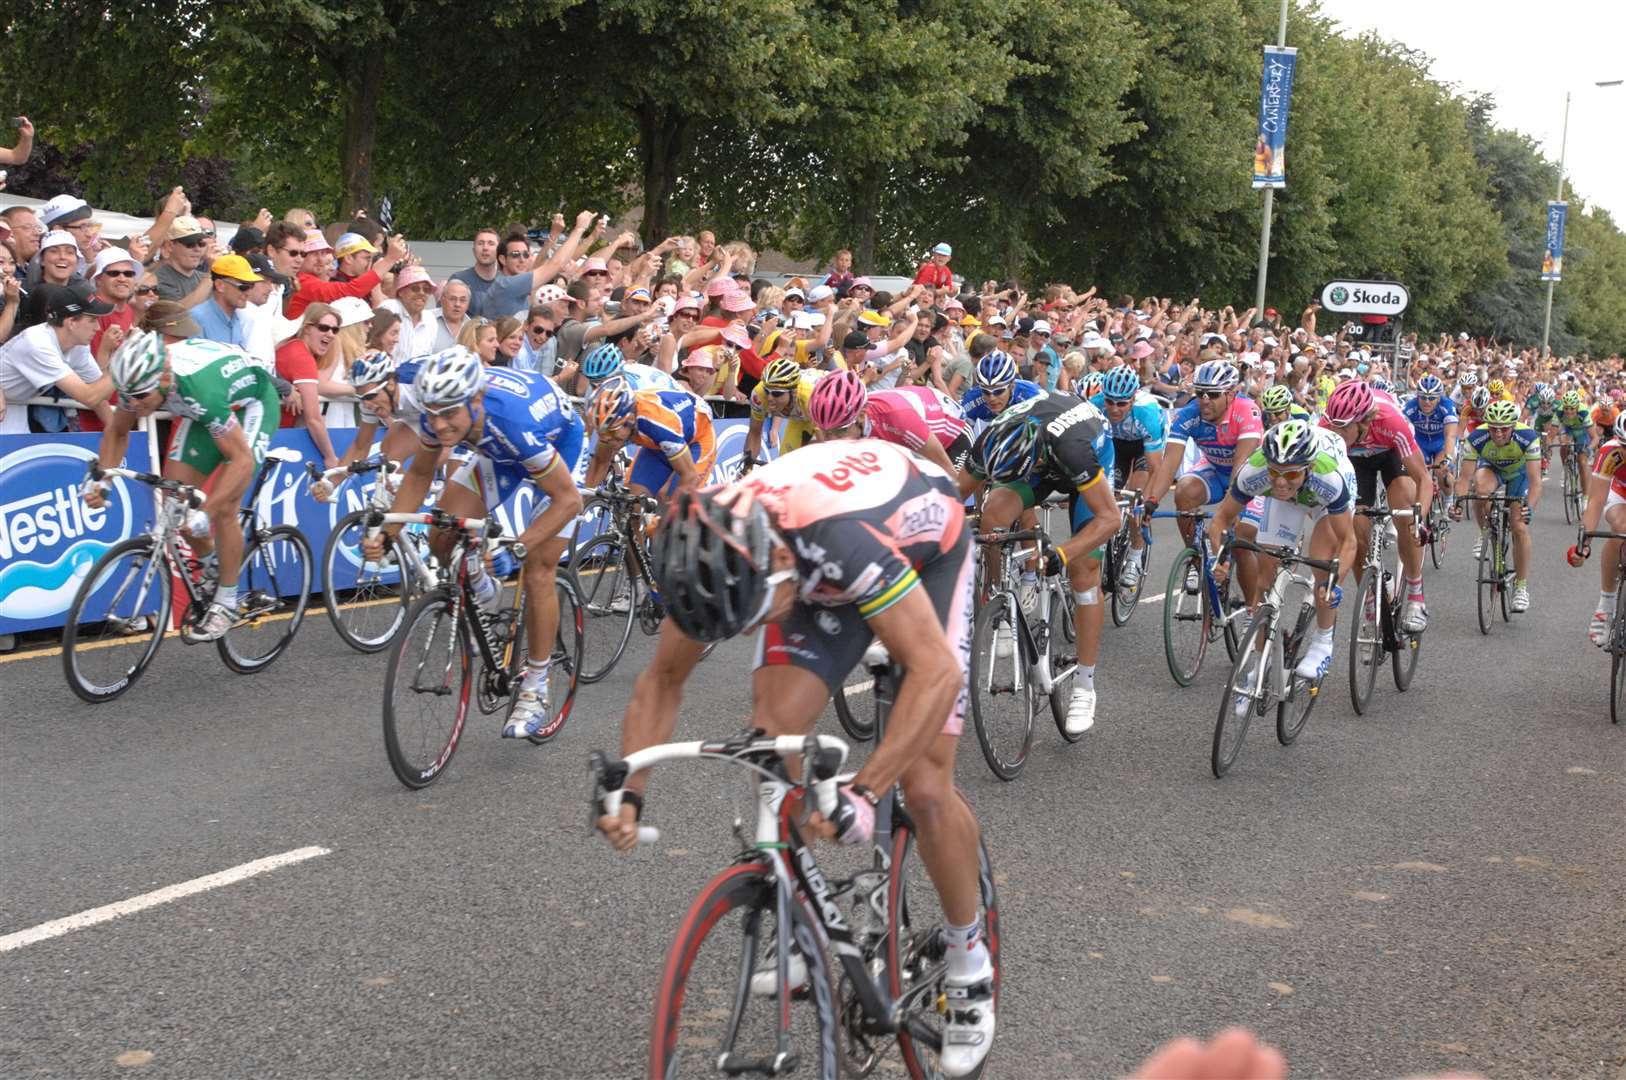 Sprint to the finish line in Canterbury on the first stage of the Tour de France in 2007. Picture: Barry Goodwin